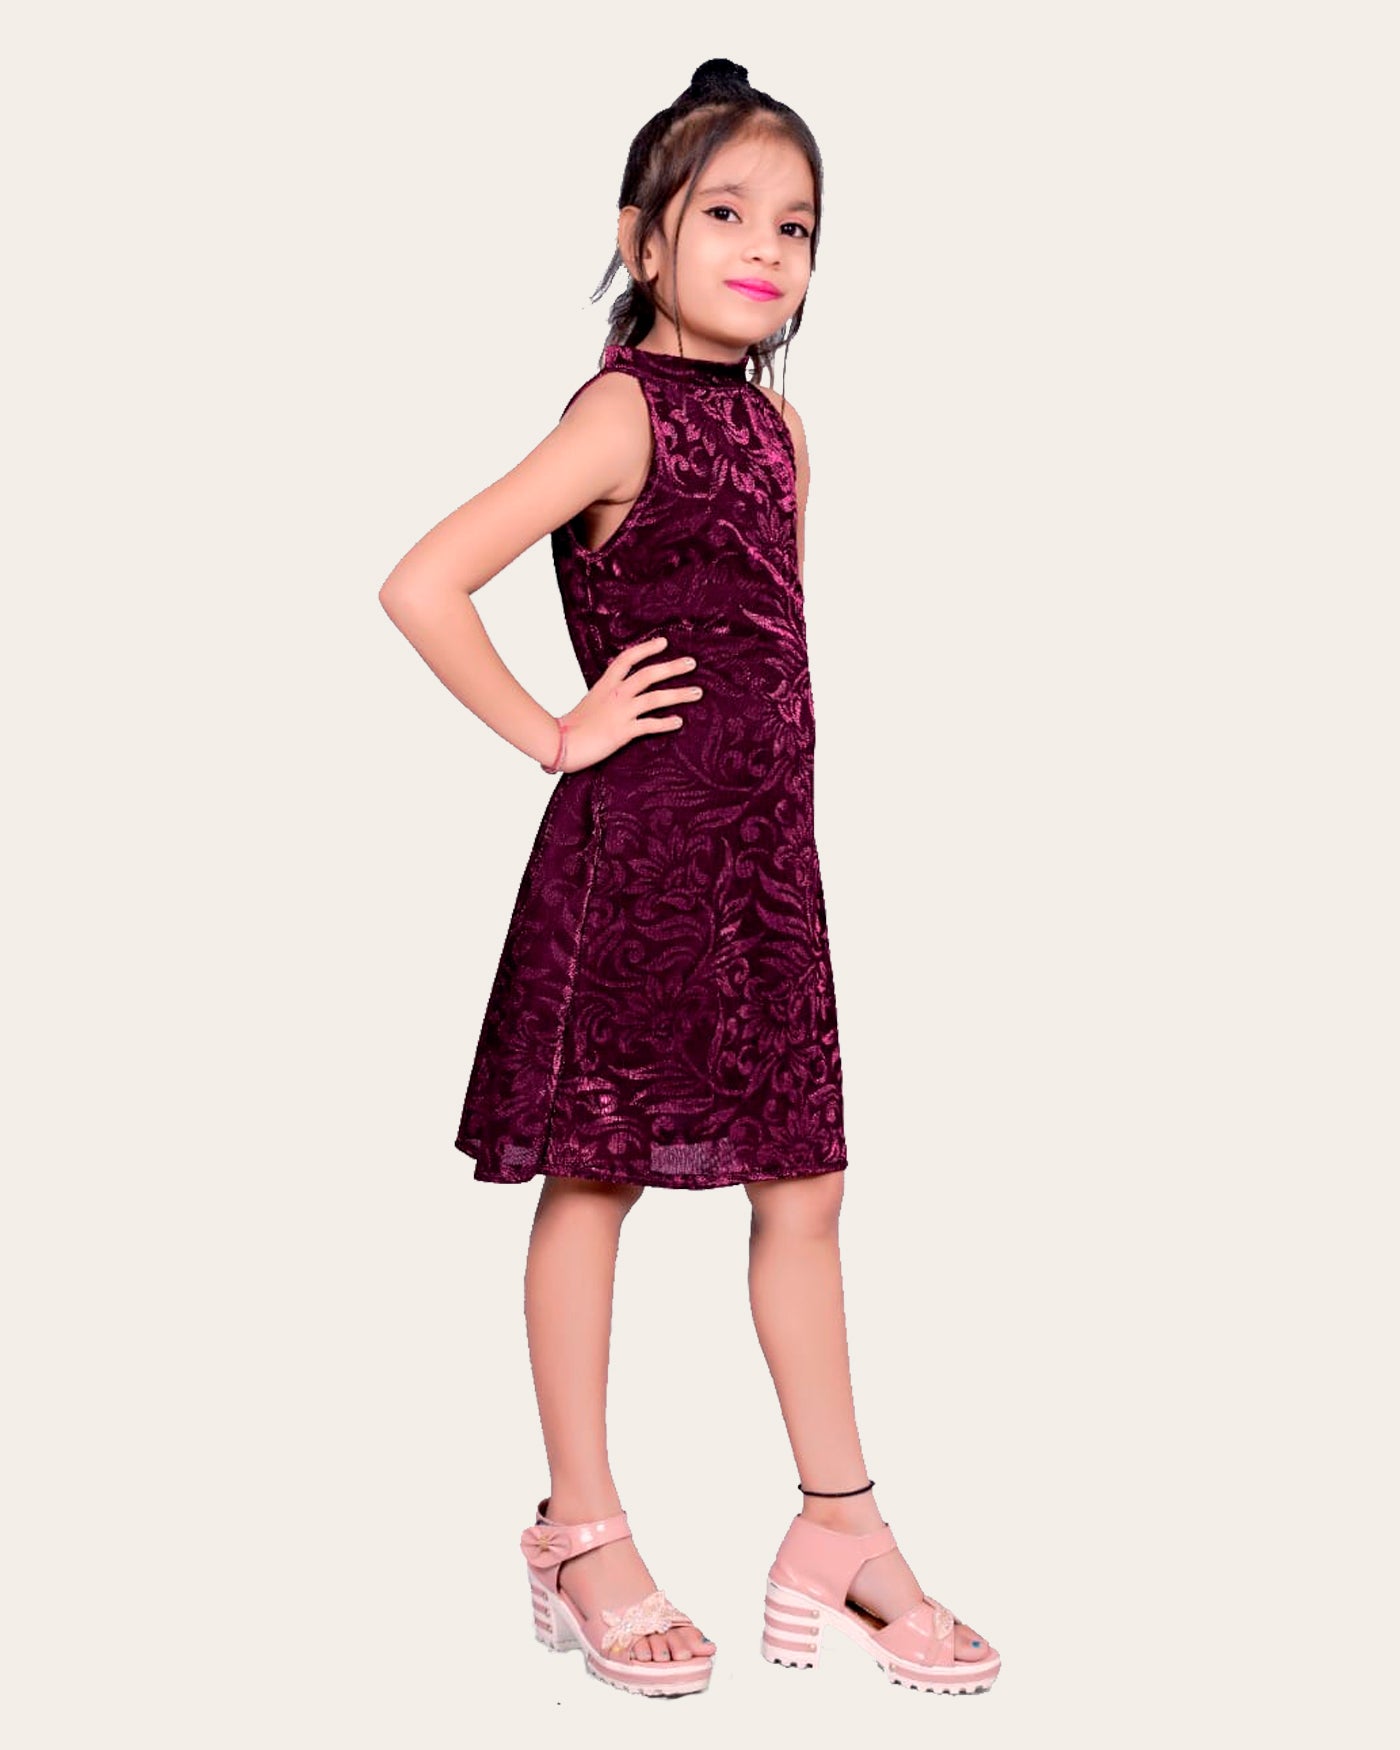 Girls Short/Mid Thigh Party Dress